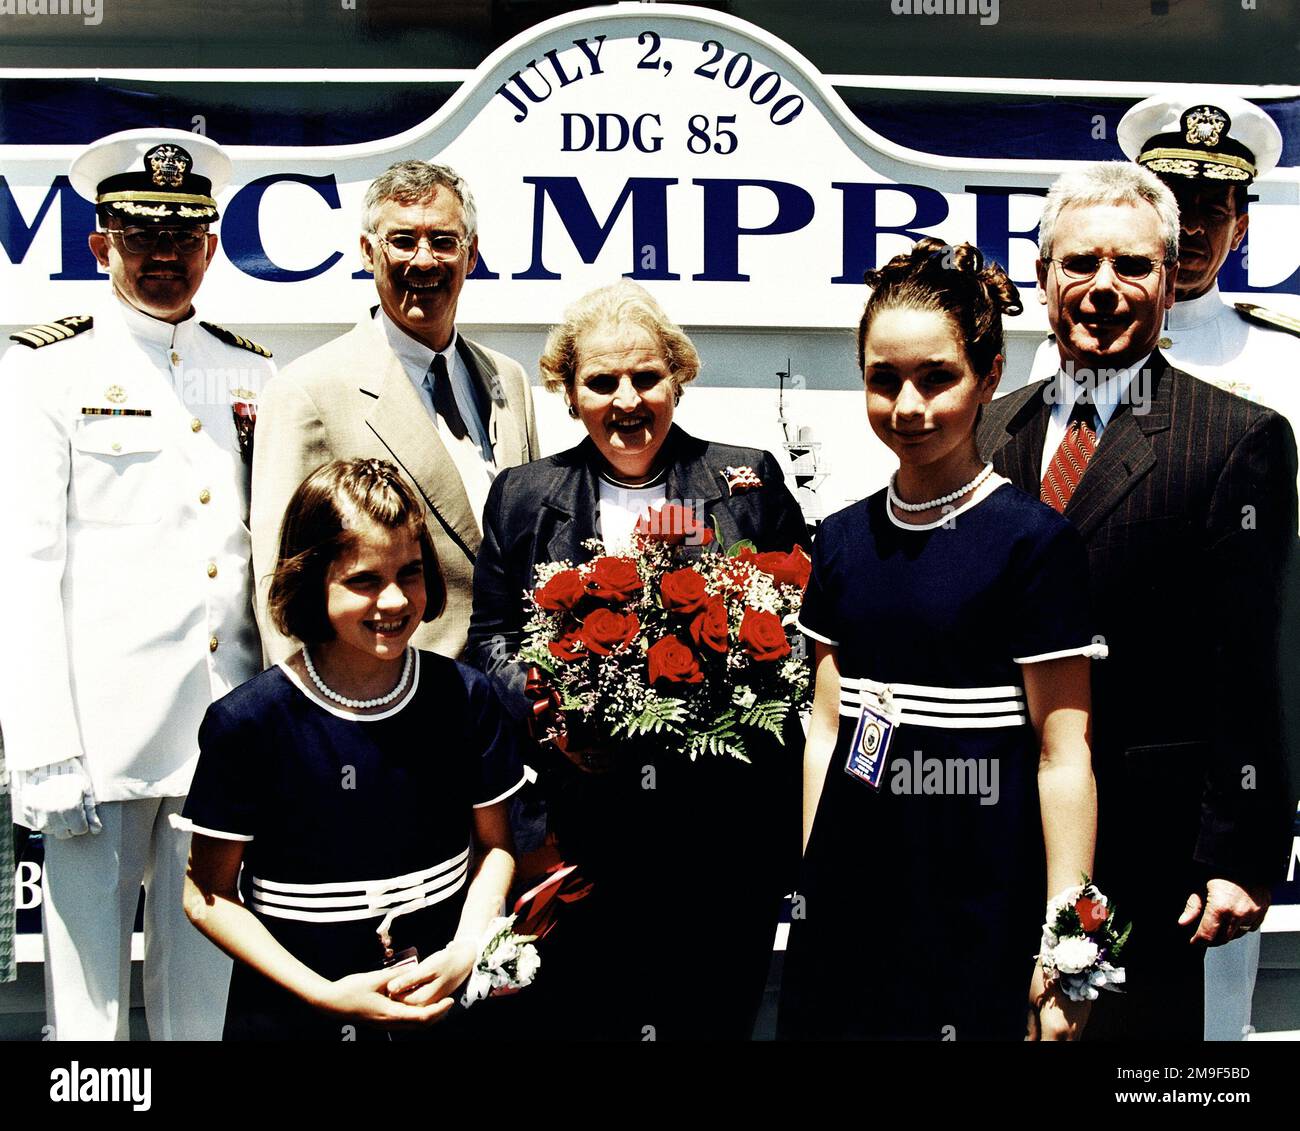 The christening party for the USS MCCAMPBELL (DDG 85) is from left to right, Captain R. Hepburn, USN, Hon. Richard Danzig, Secretary of the Navy, Hon. Madeline K. Albright, Secretary of State and Ship's sponsor, Mr. Allen Cameron, President and CEO of Bath Iron Works, Rear Admiral Michael M. Mullen, USN. In the foreground are the Maids of Honor, Miss Levesque and Miss Moore. Base: Bath State: Maine (ME) Country: United States Of America (USA) Stock Photo